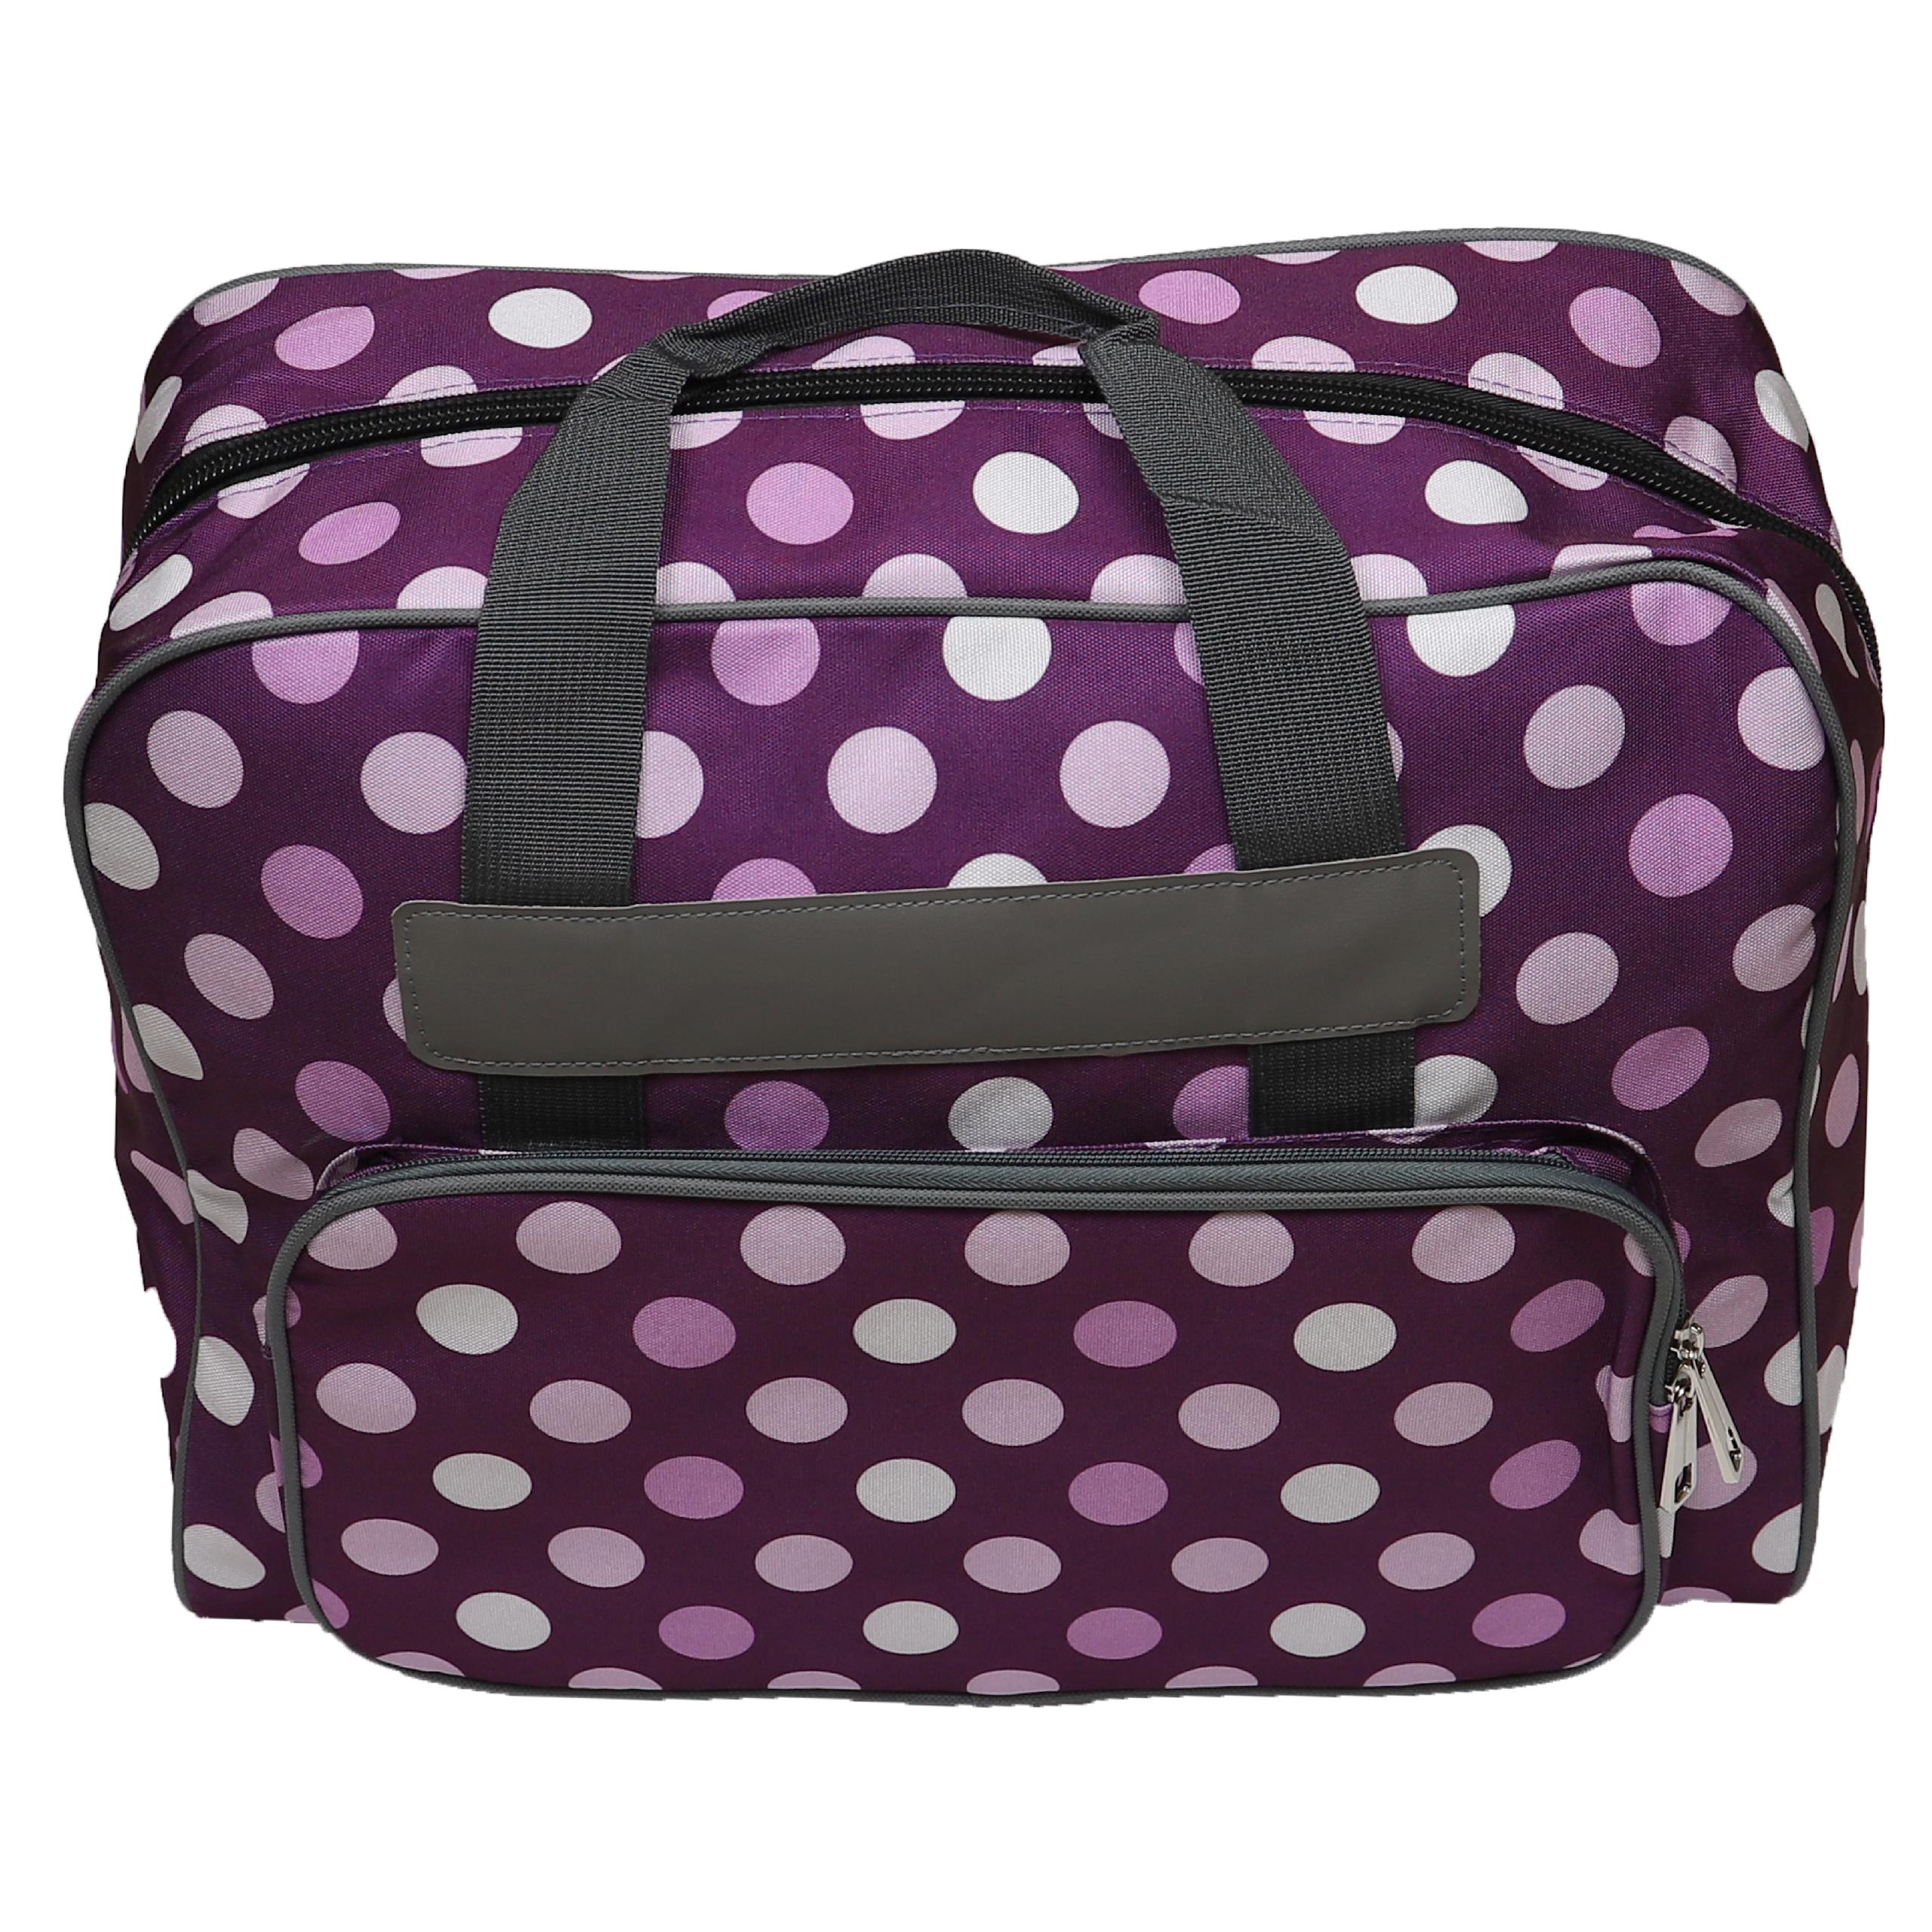 vhbw Carrying Bag Sewing Machines - Transport and Storage Case, 48 x 24 x 31.8 cm Purple with Spots